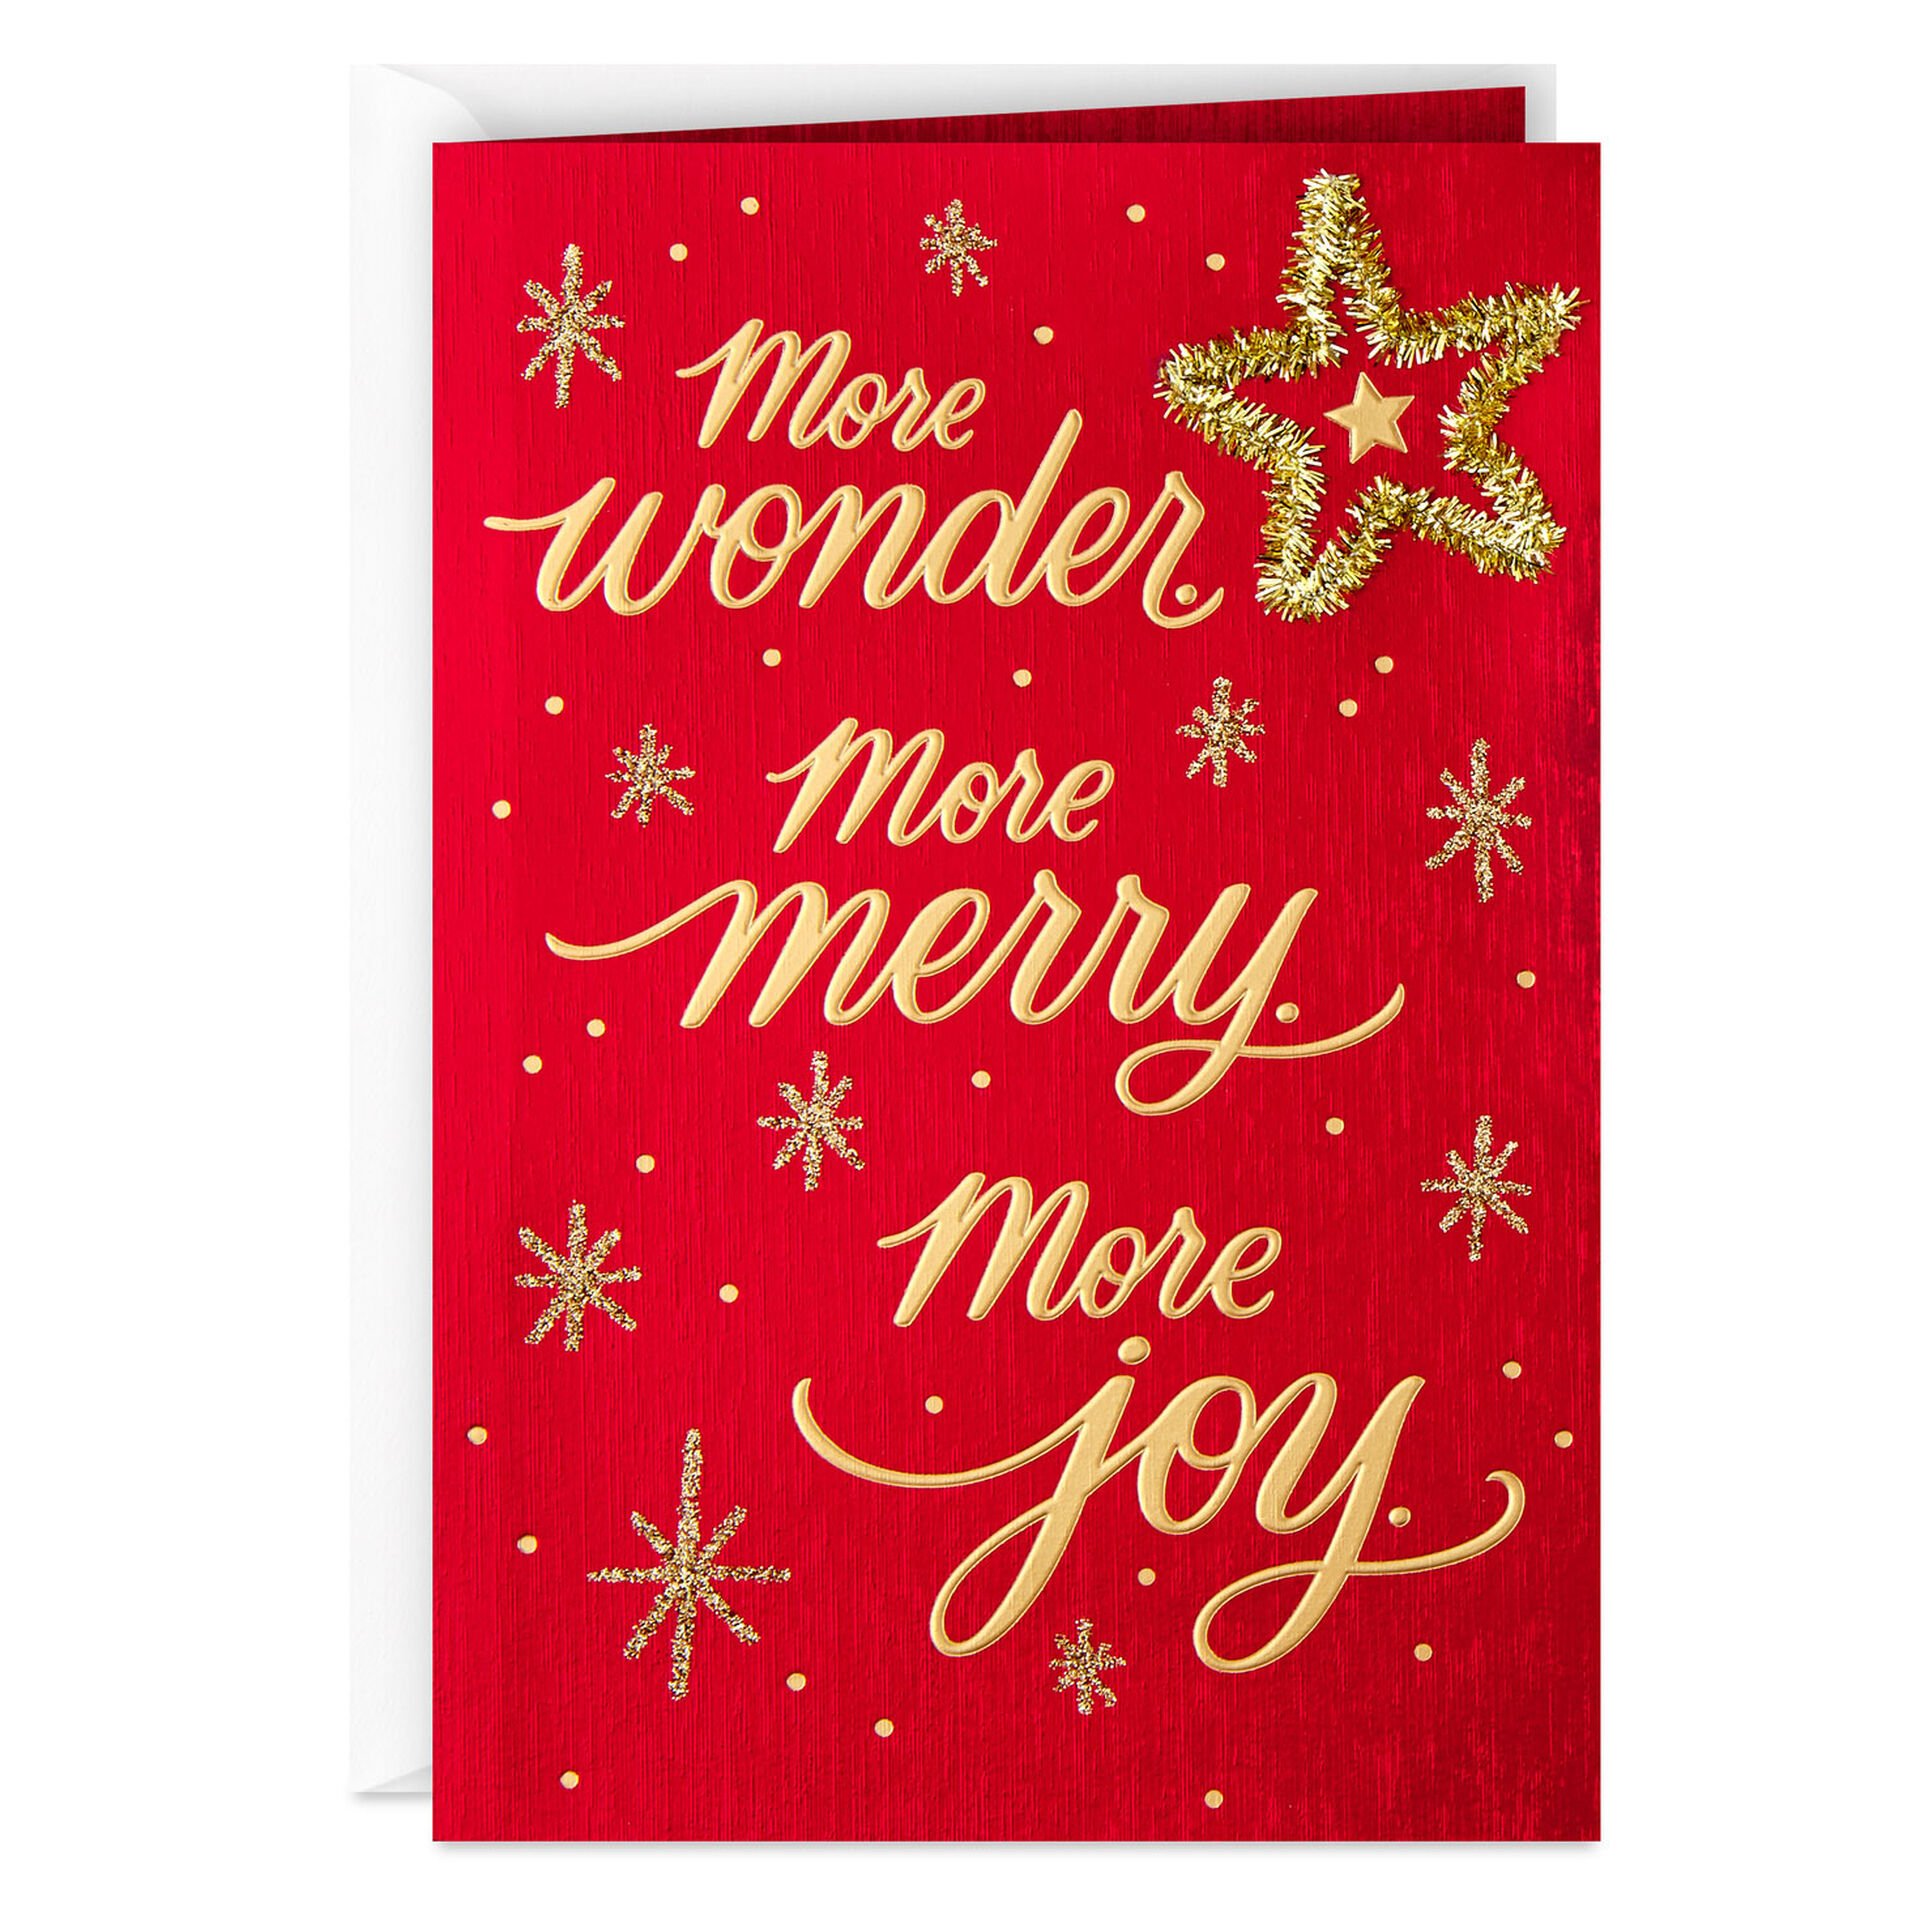 Stars-and-Snowflakes-Red-Foil-Christmas-Card_599XZH6411_01.jpg